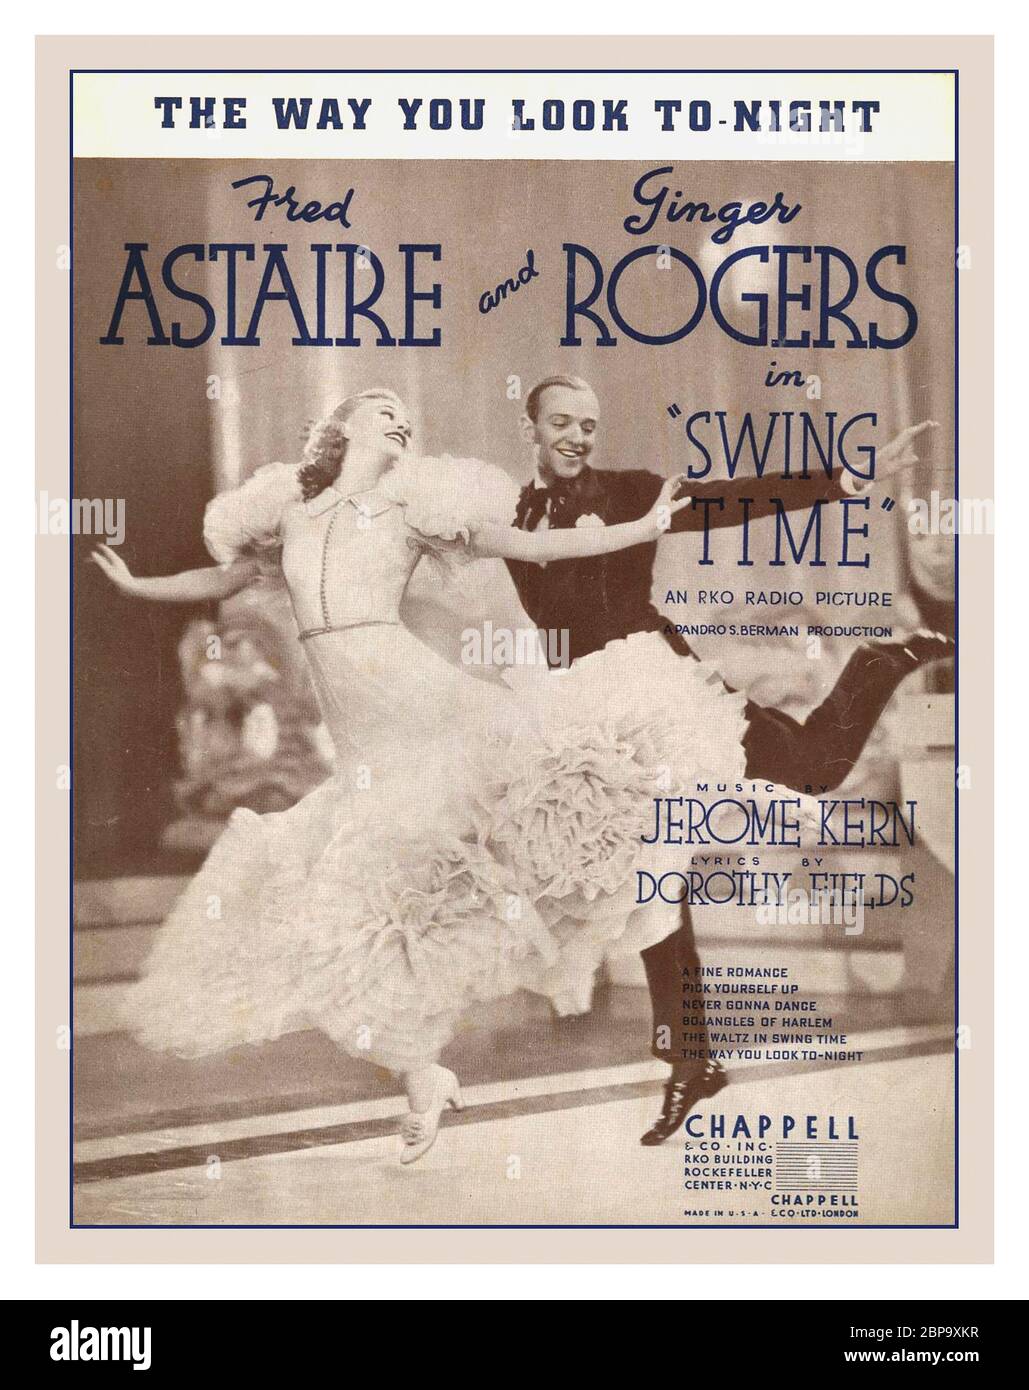 Fred Astaire & Ginger Rogers 1930's Cover Sheet music 'SWING TIME' for the  song “The Way You Look Tonight,” with music by Jerome Kern and lyrics by  Dorothy Fields. It was published